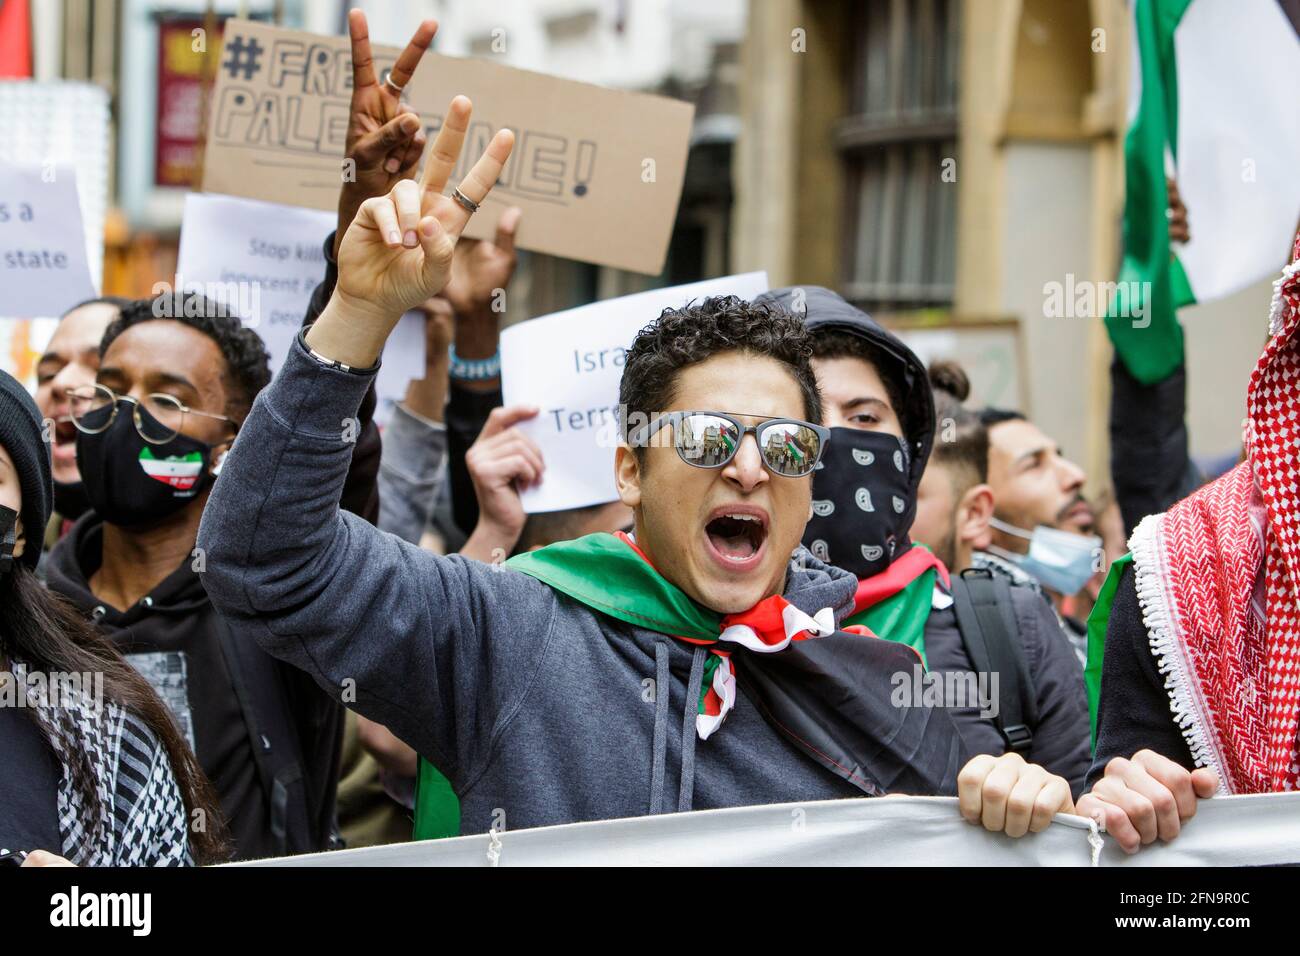 Bristol, UK. 15th May, 2021. Pro-Palestinian supporters carrying placards and waving Palestinian flags are pictured as they march through Bristol in a protest march to show their solidarity with the Palestinian people. The protest march and rally was held to allow people to show their support and solidarity with the Palestinian people after 73 Years of Nakba and to protest about Israel's recent actions in Gaza. Credit: Lynchpics/Alamy Live News Stock Photo